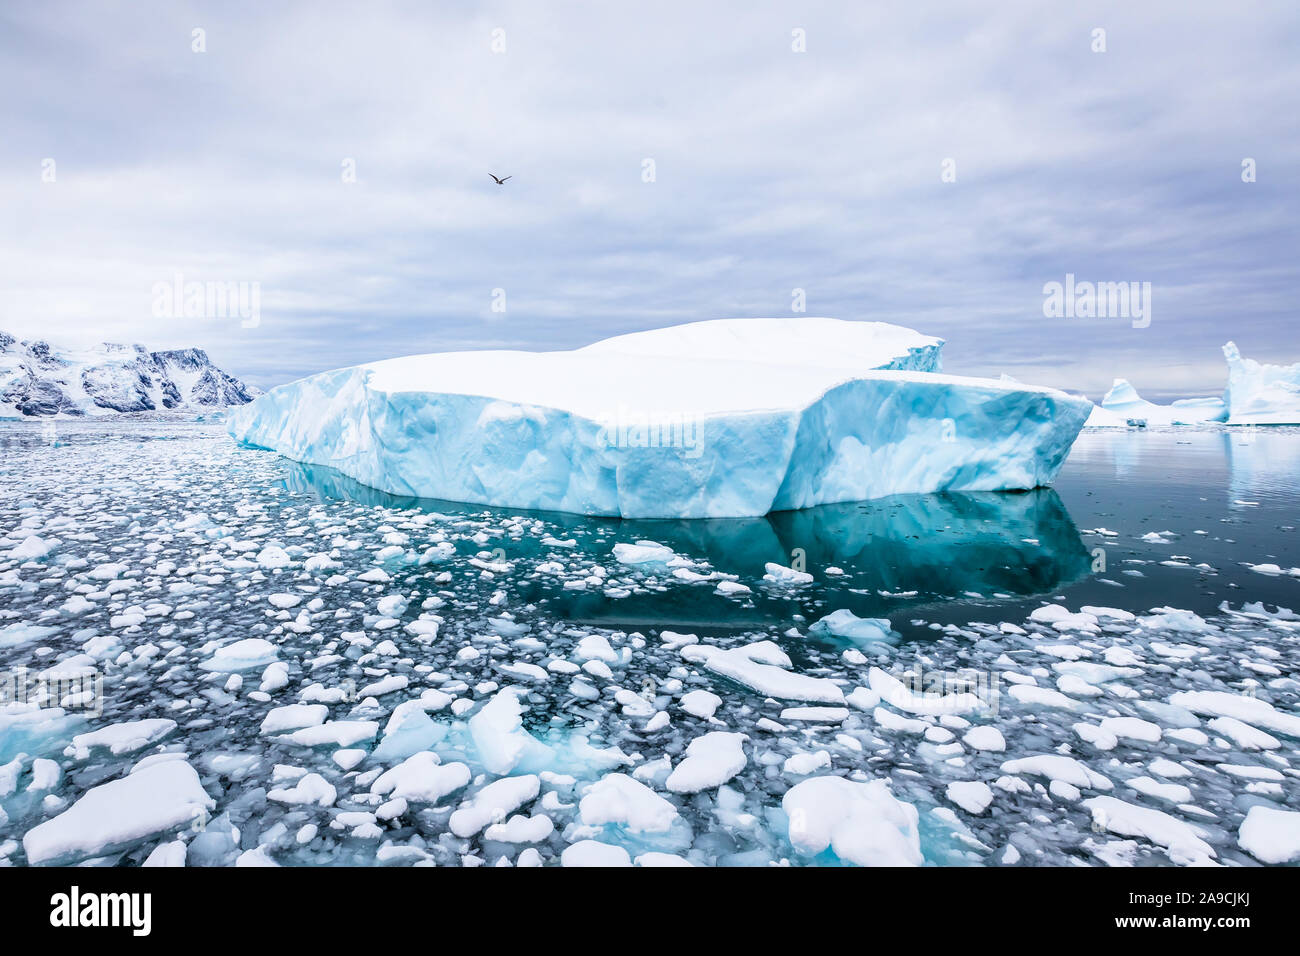 Iceberg with blue ice and covered by snow in Antarctica, scenic frozen landscape in Antarctic Peninsula Stock Photo